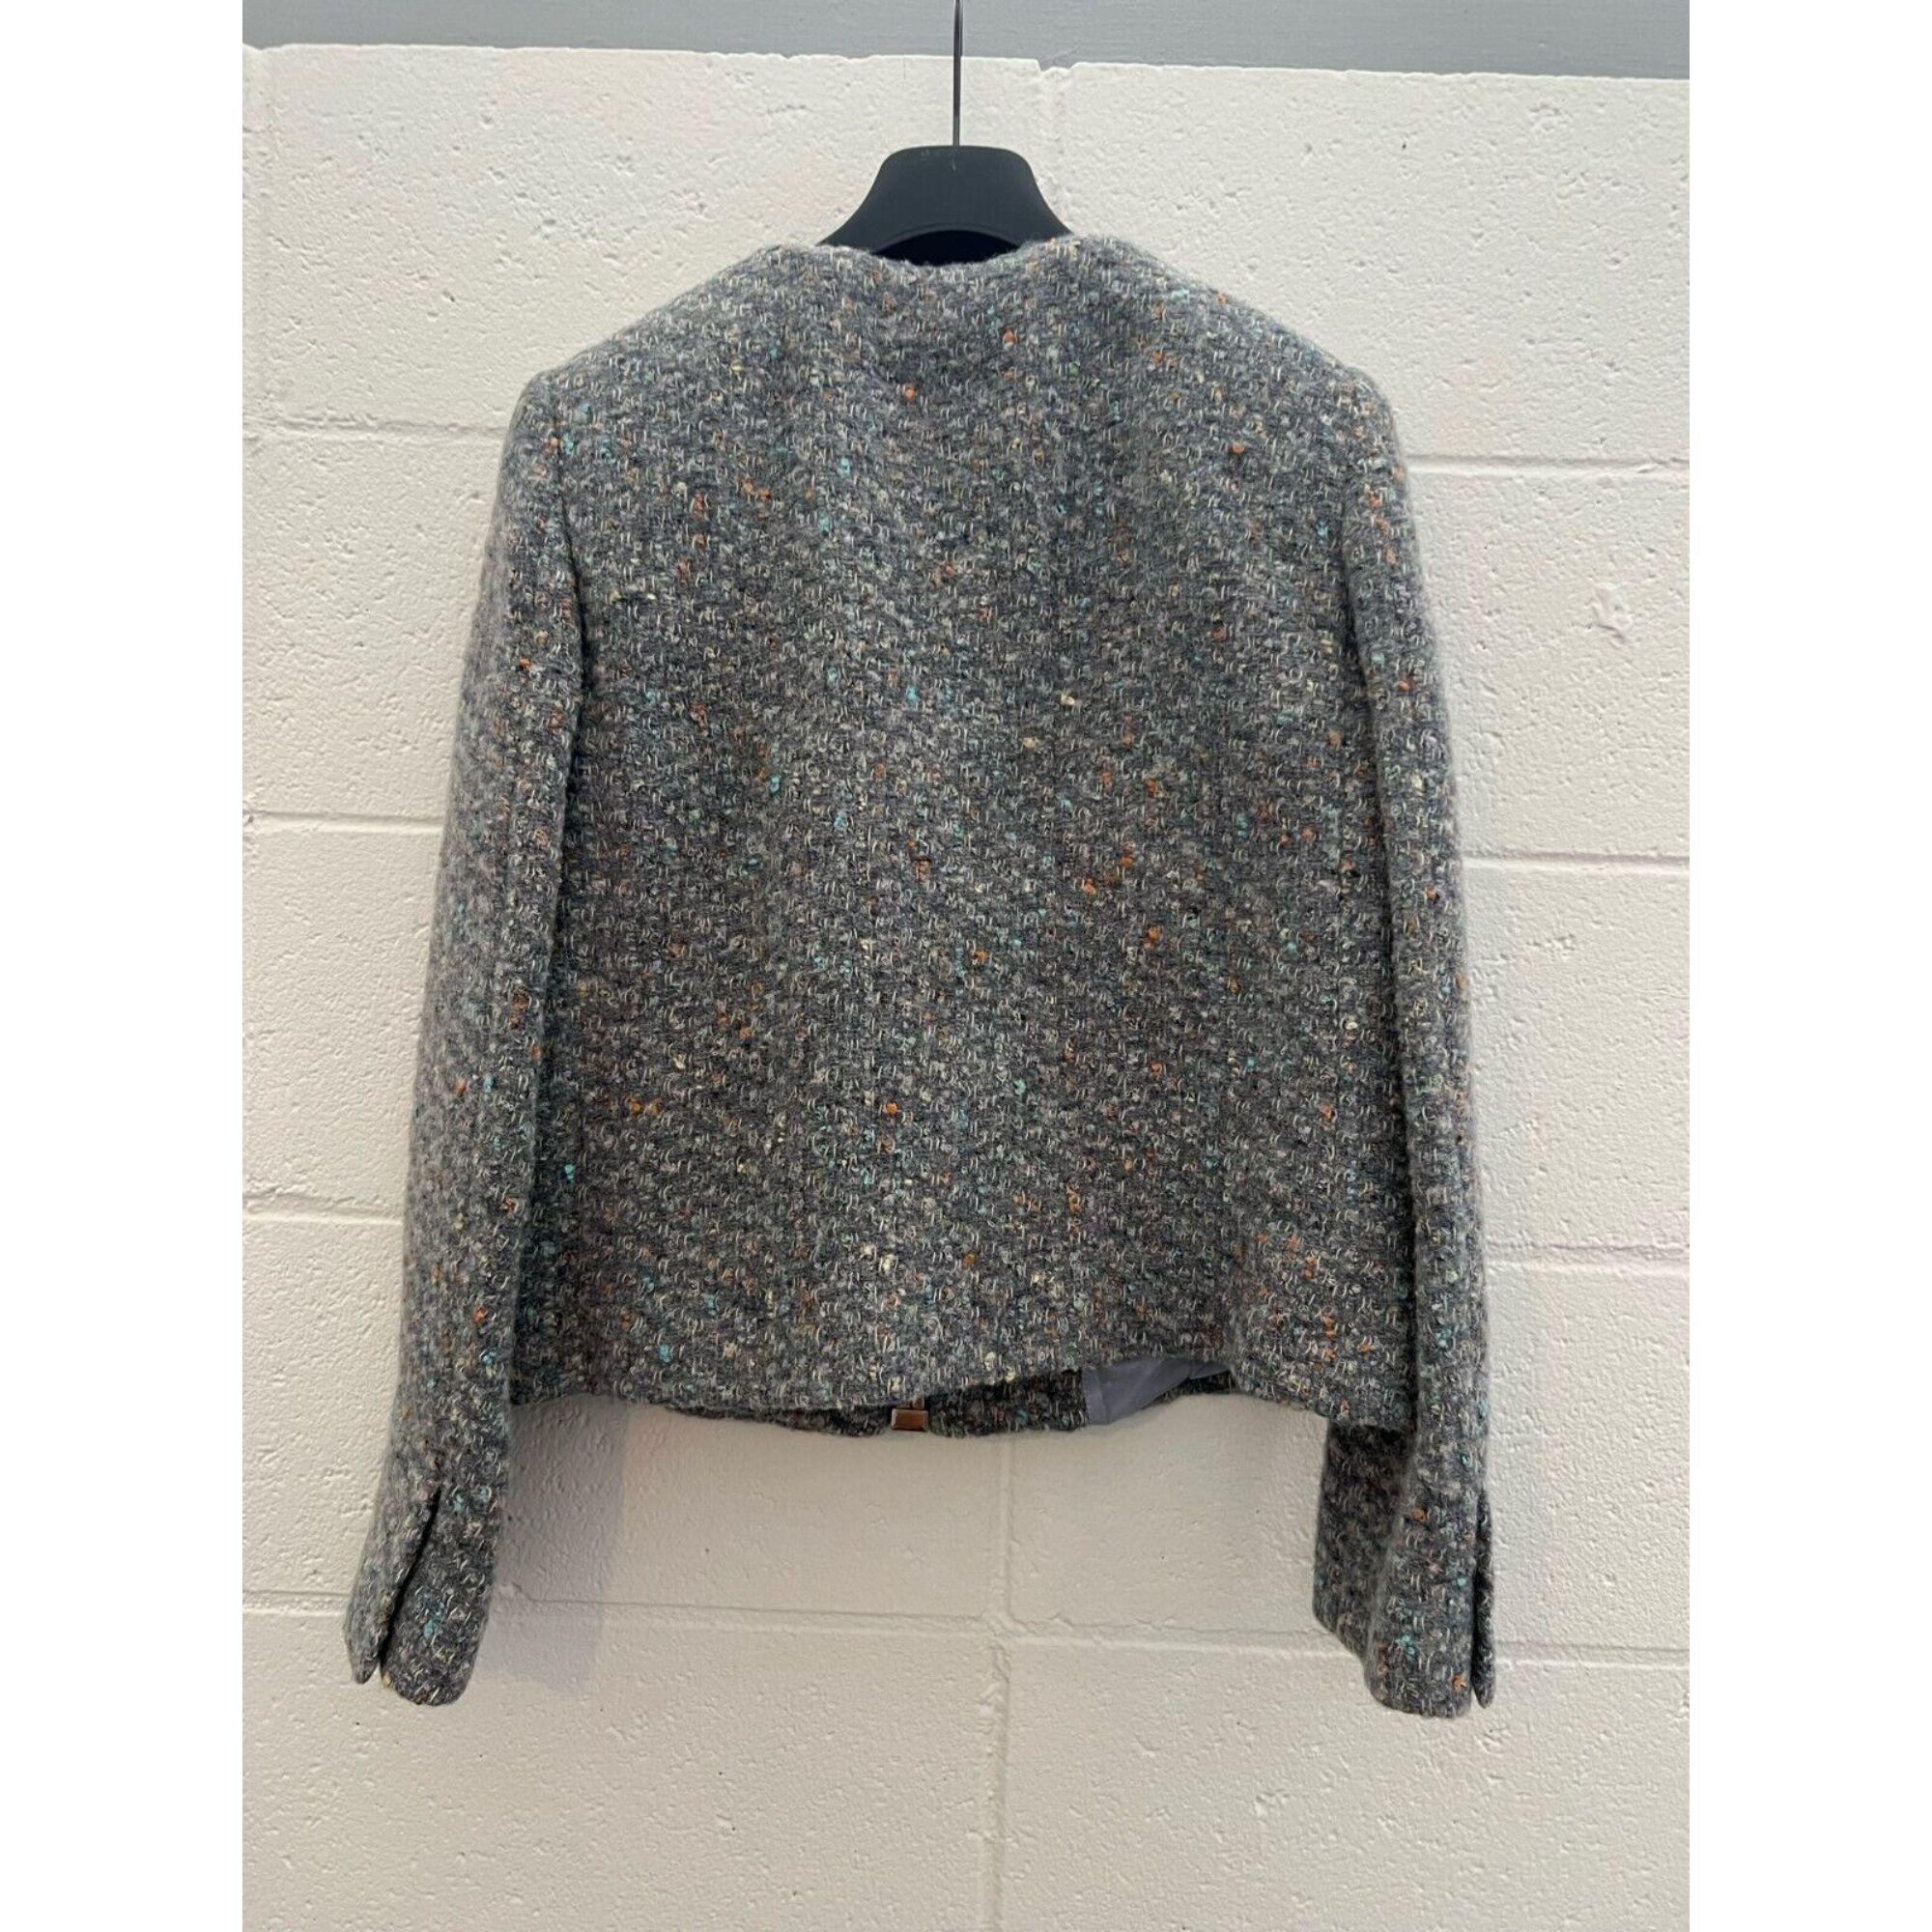 AW20 Moschino Couture Boucle Wool Jacket by Jeremy Scott, Size US 8 For Sale 9